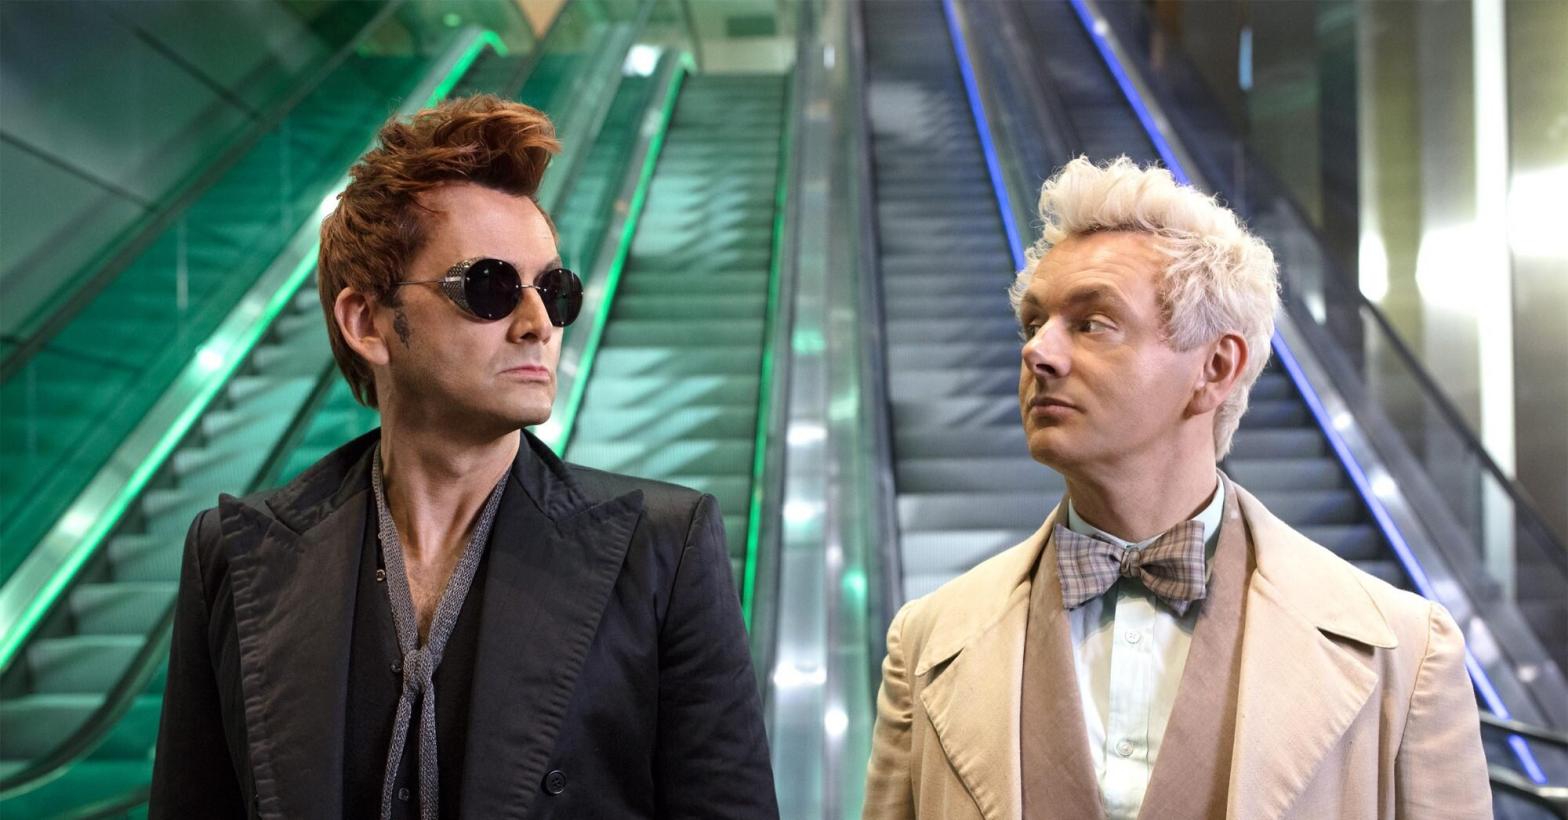 We could all use a little more Crowley (David Tennant) and Aziraphale (Michael Sheen) in our lives. (Image: Amazon Studios)